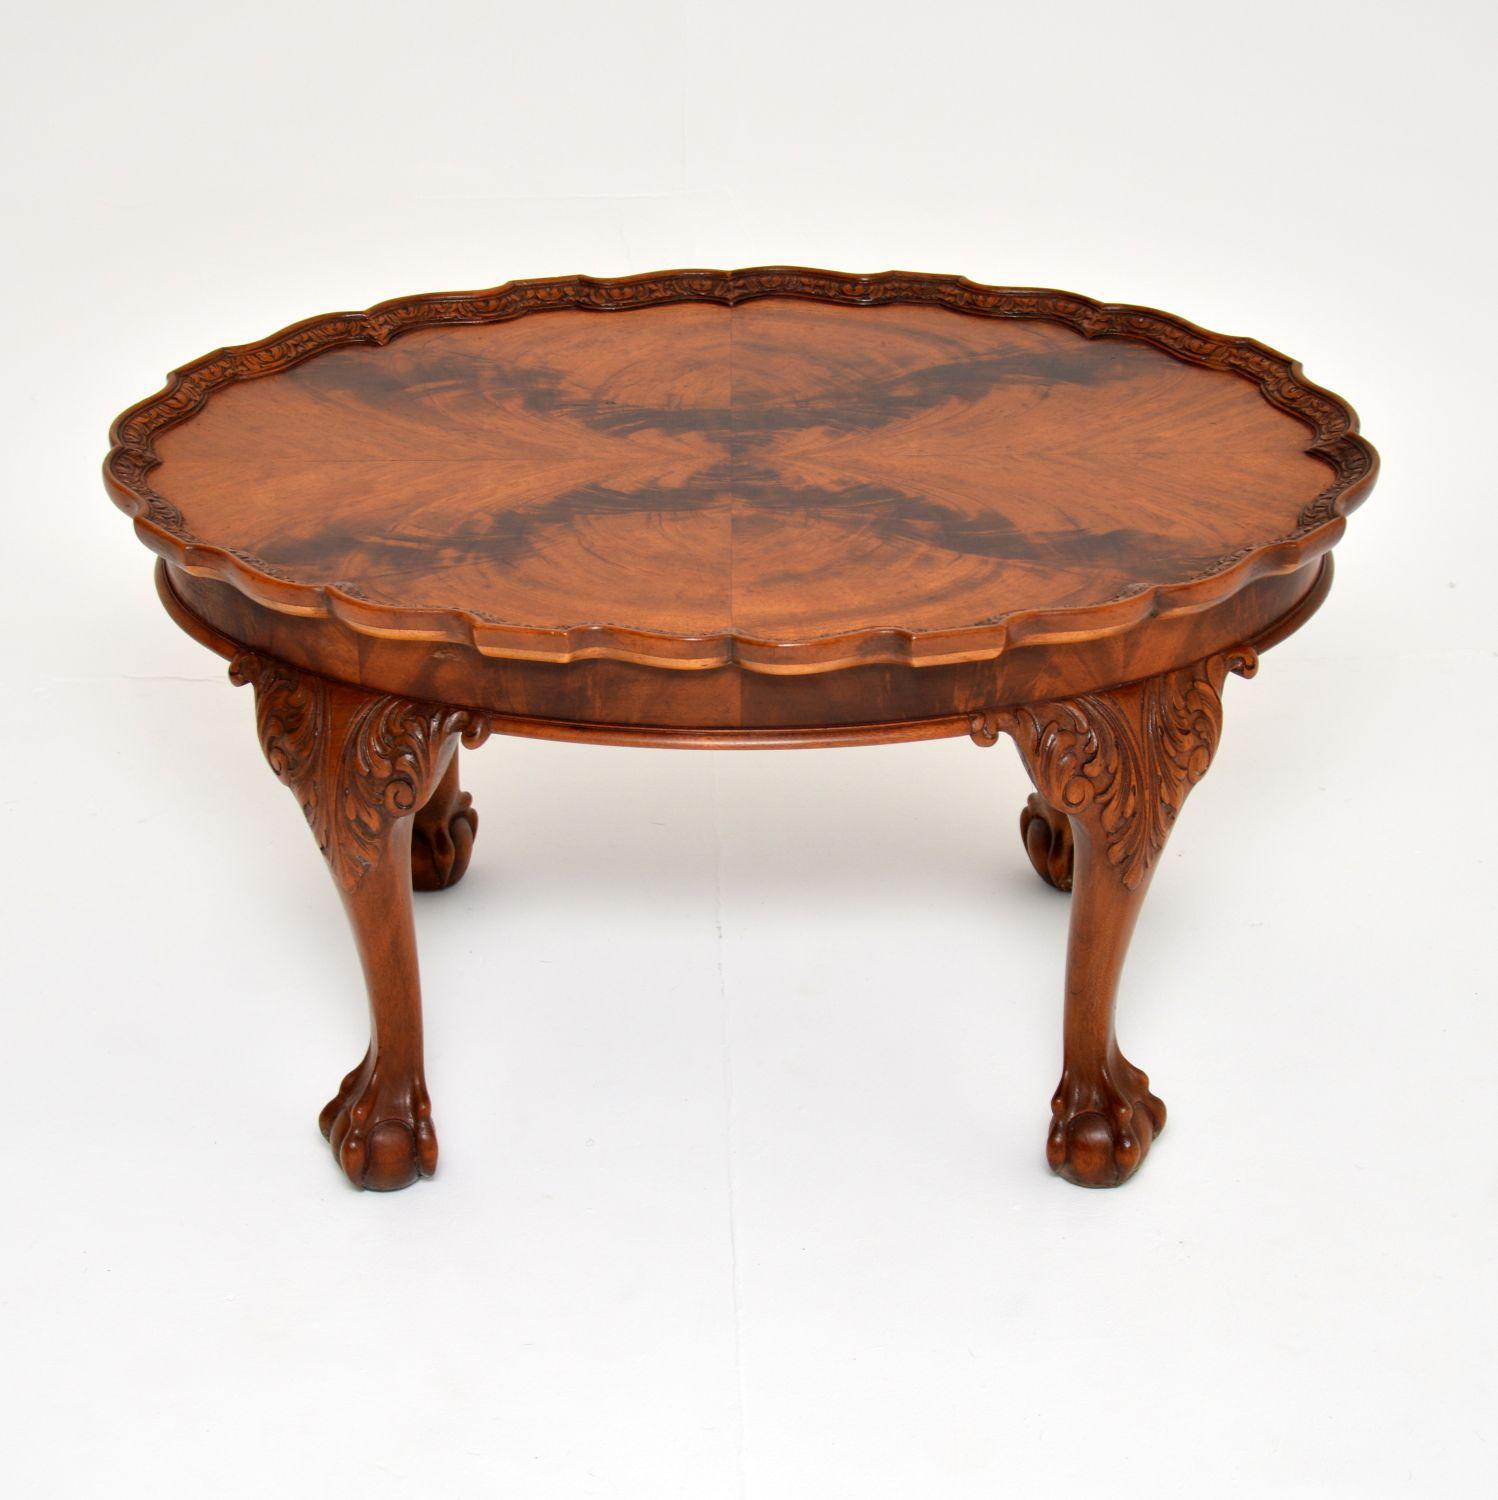 A stunning antique pie crust coffee table in wood. This is in the Chippendale style, it dates from around the 1900-1910 period.

The quality is amazing, it is a very useful size and is very sturdily built. There is crisp and intricate carving all